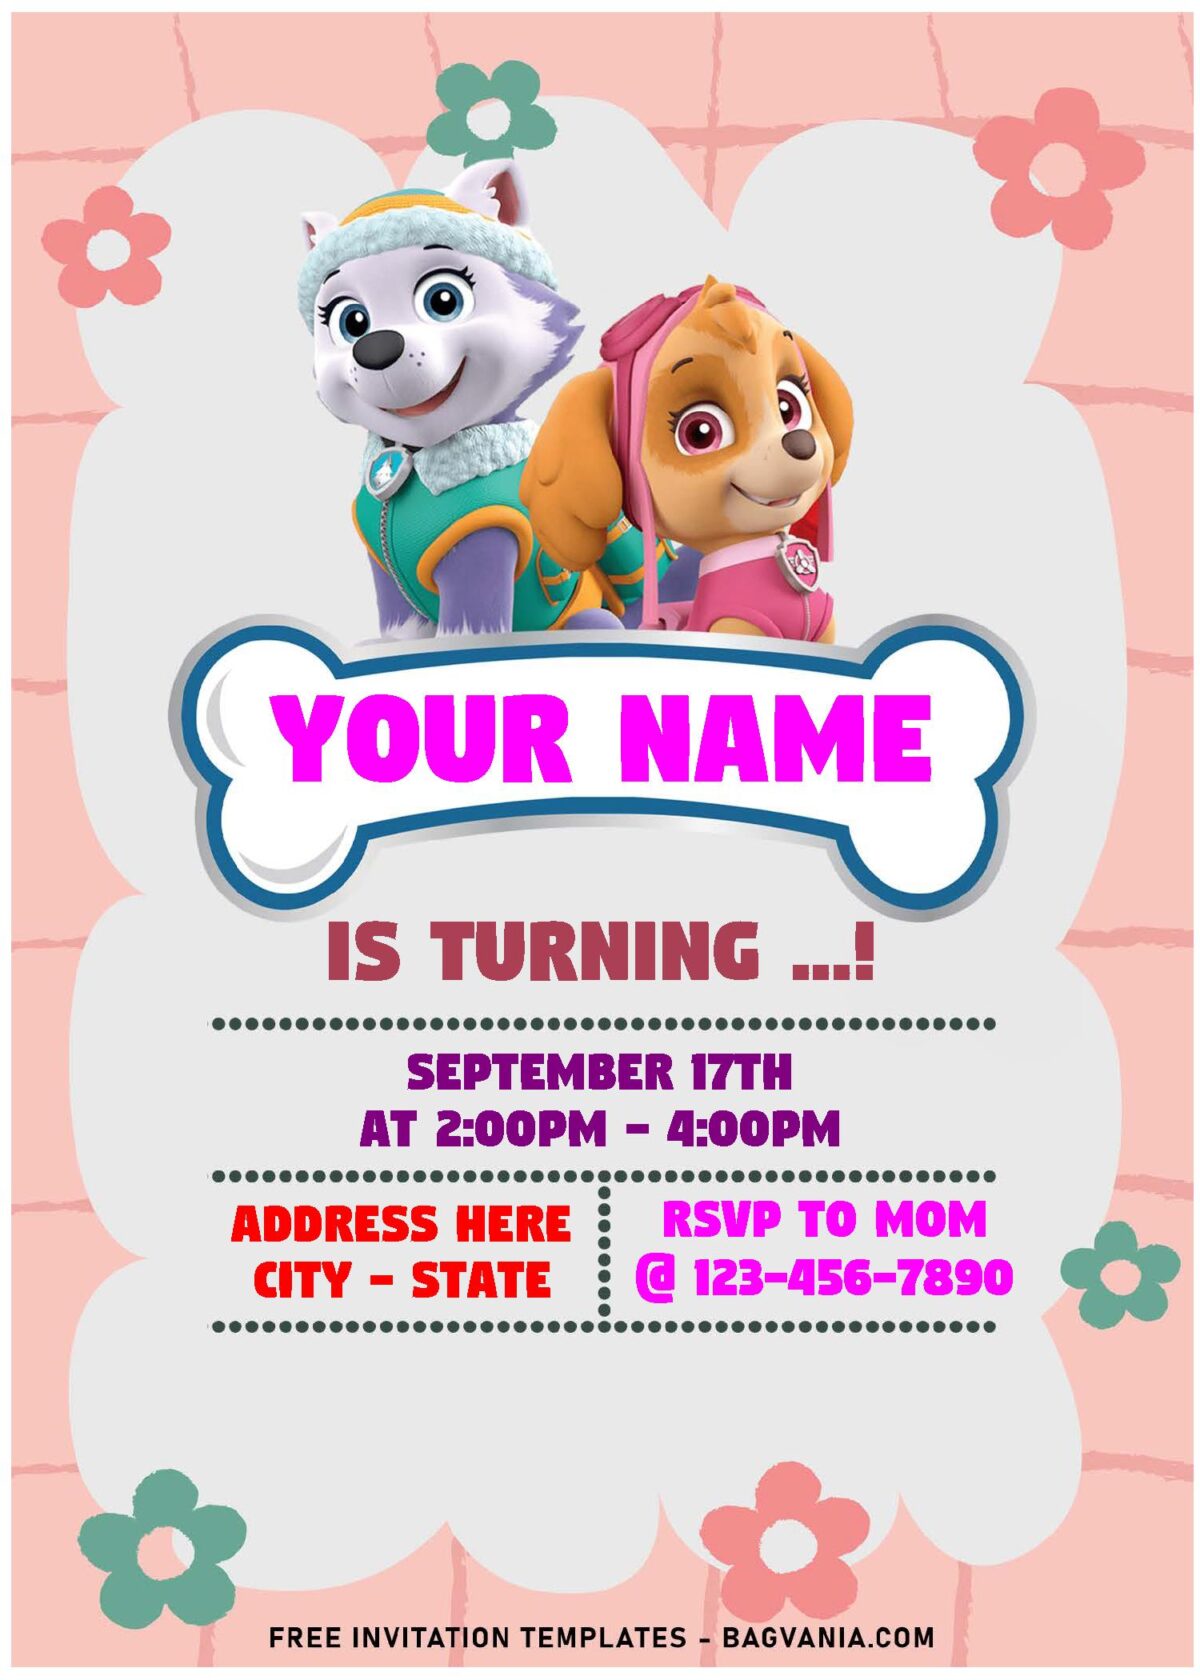 (Free Editable PDF) Quirky Cute Skye And Everest PAW Patrol Birthday Invitation Templates with hand drawn flowers